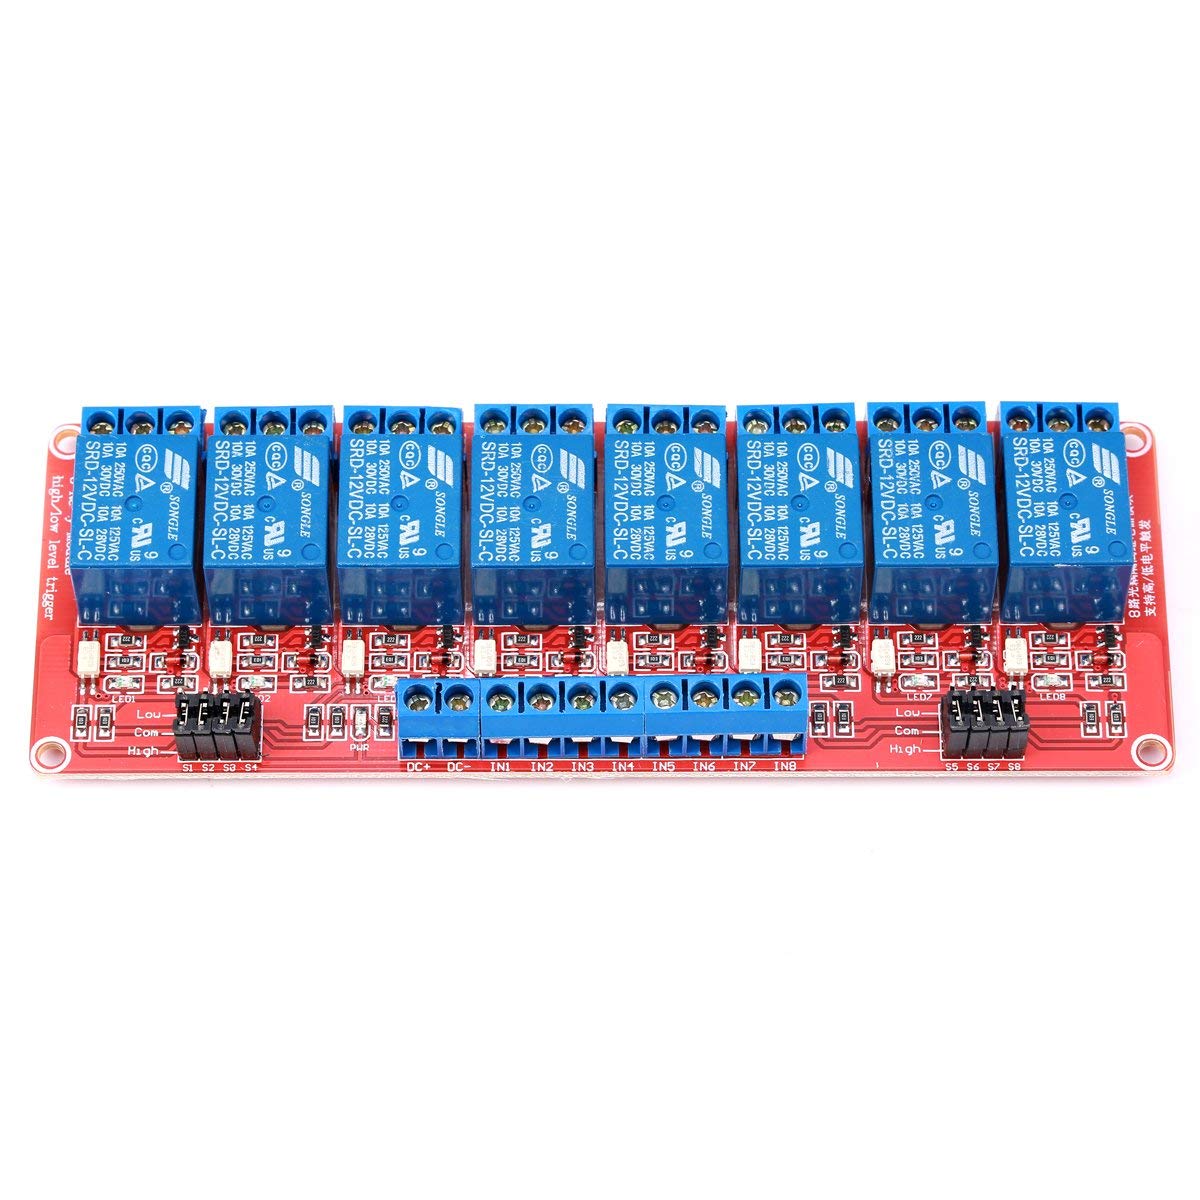 DC 5V//12V//24V Board Relay Module Switch with OPTO Isolation High Low Level Trigger 5V Yosoo Health Gear 8 Channel Relay Module